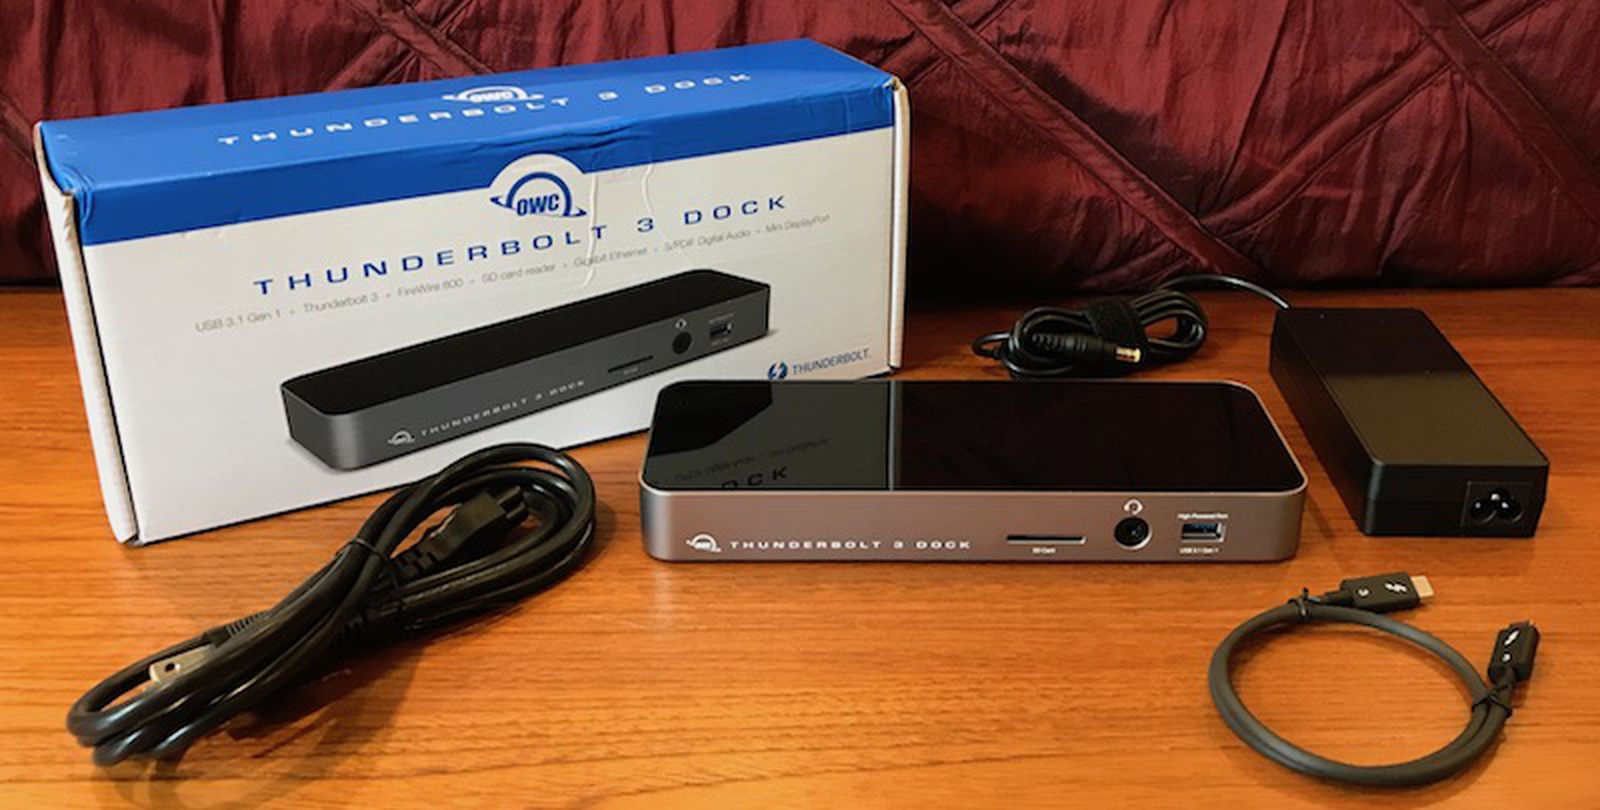 Review: OWC's Thunderbolt 3 Dock Gives Your MacBook Pro 13